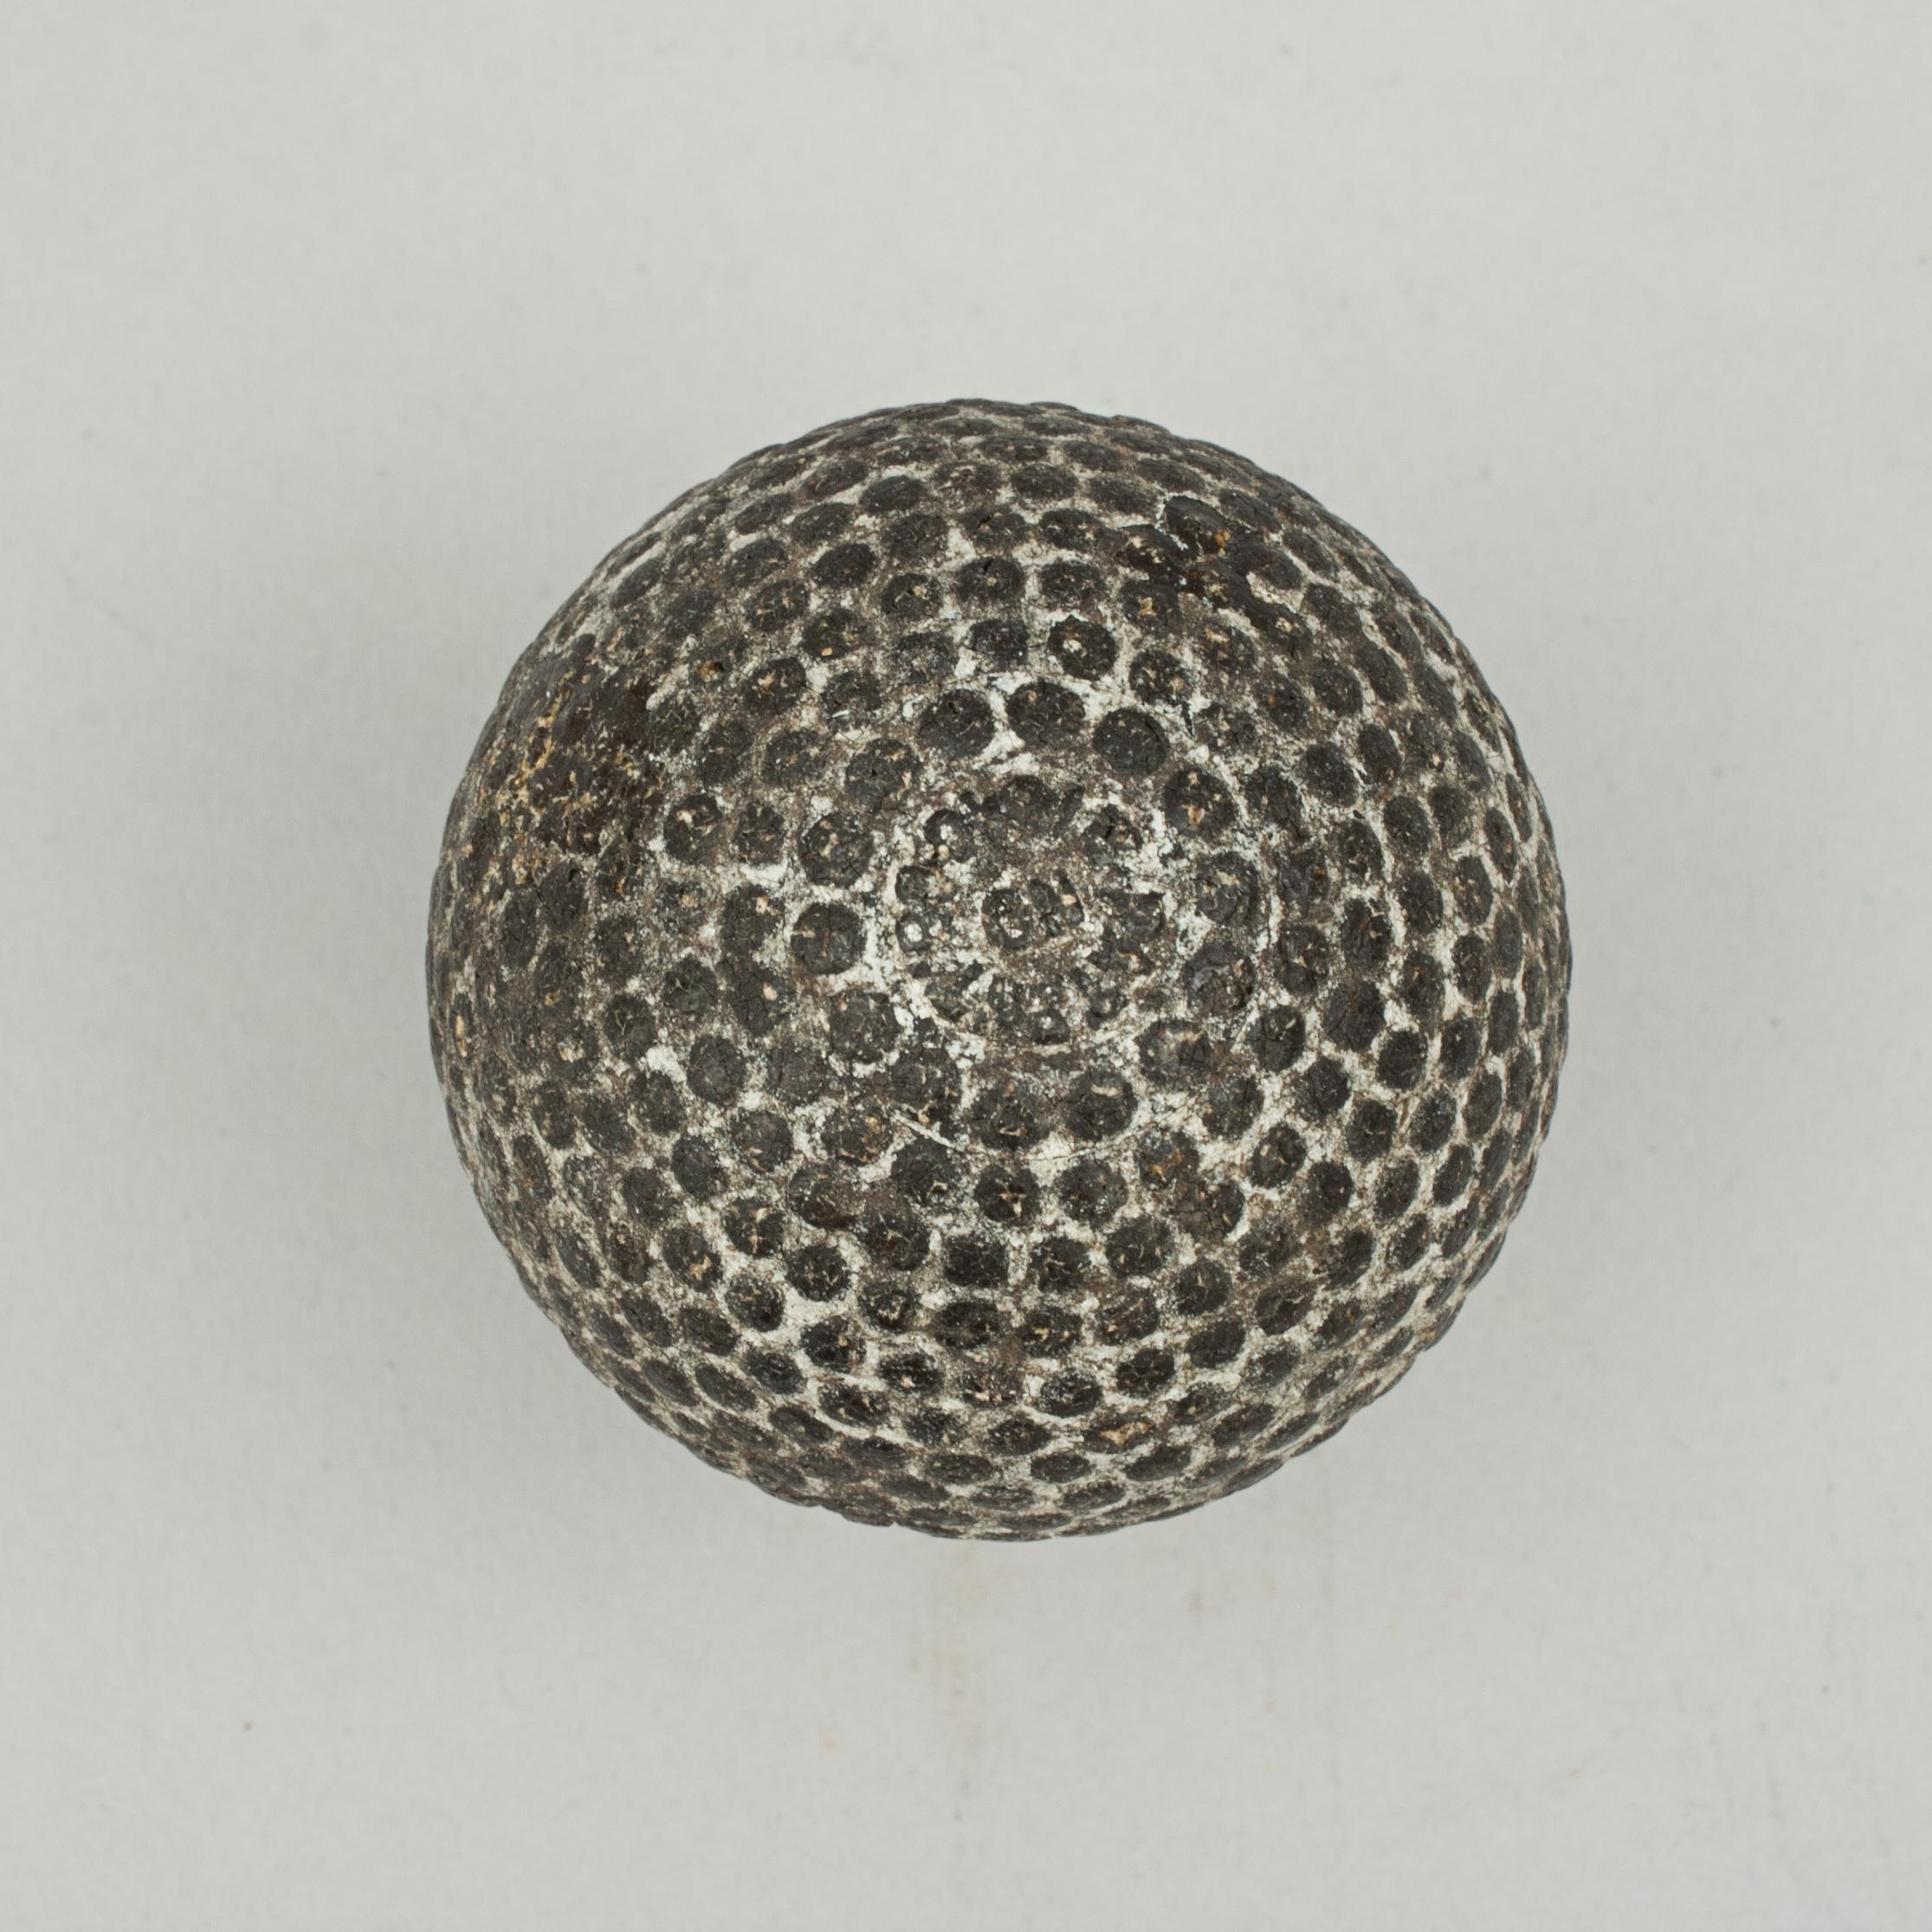 Patent bramble pattern golf ball by St. Mungo.
A good example of 'The Colonel' bramble patterned rubber core golf ball. The golf ball is in good condition and is manufactured by St. Mungo Manufacturing Co. of America, Newark, New Jersey and